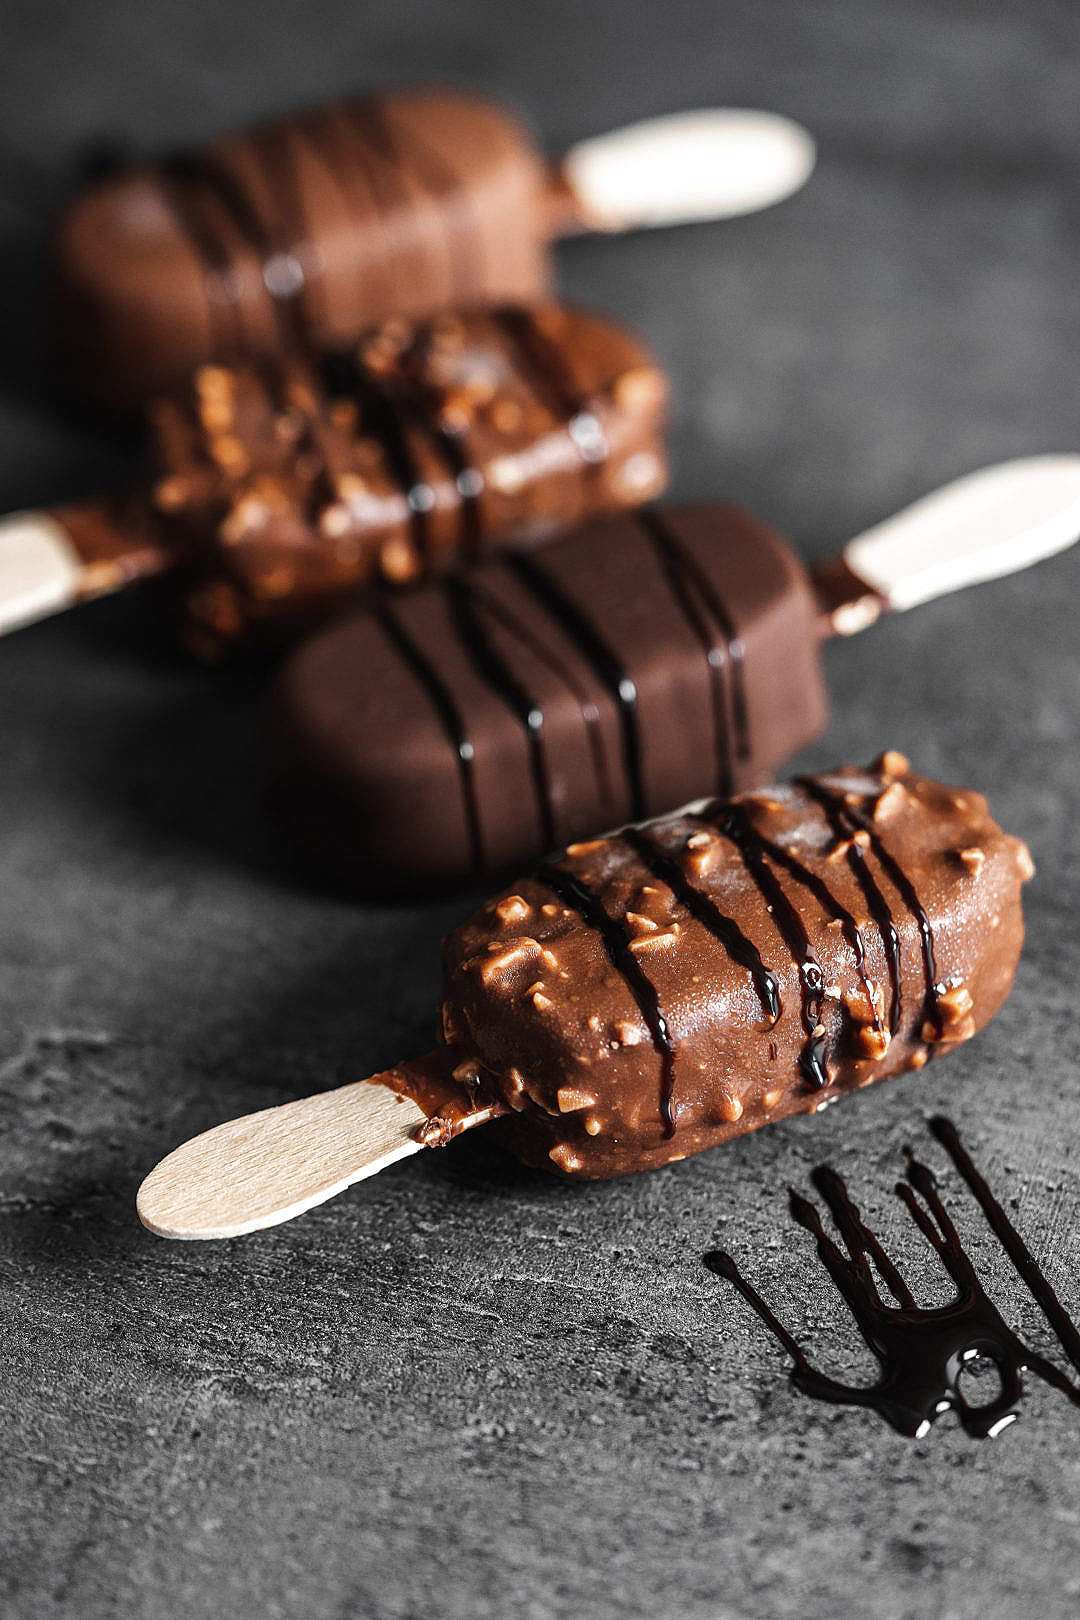 Chocolate Ice Lolly Vertical